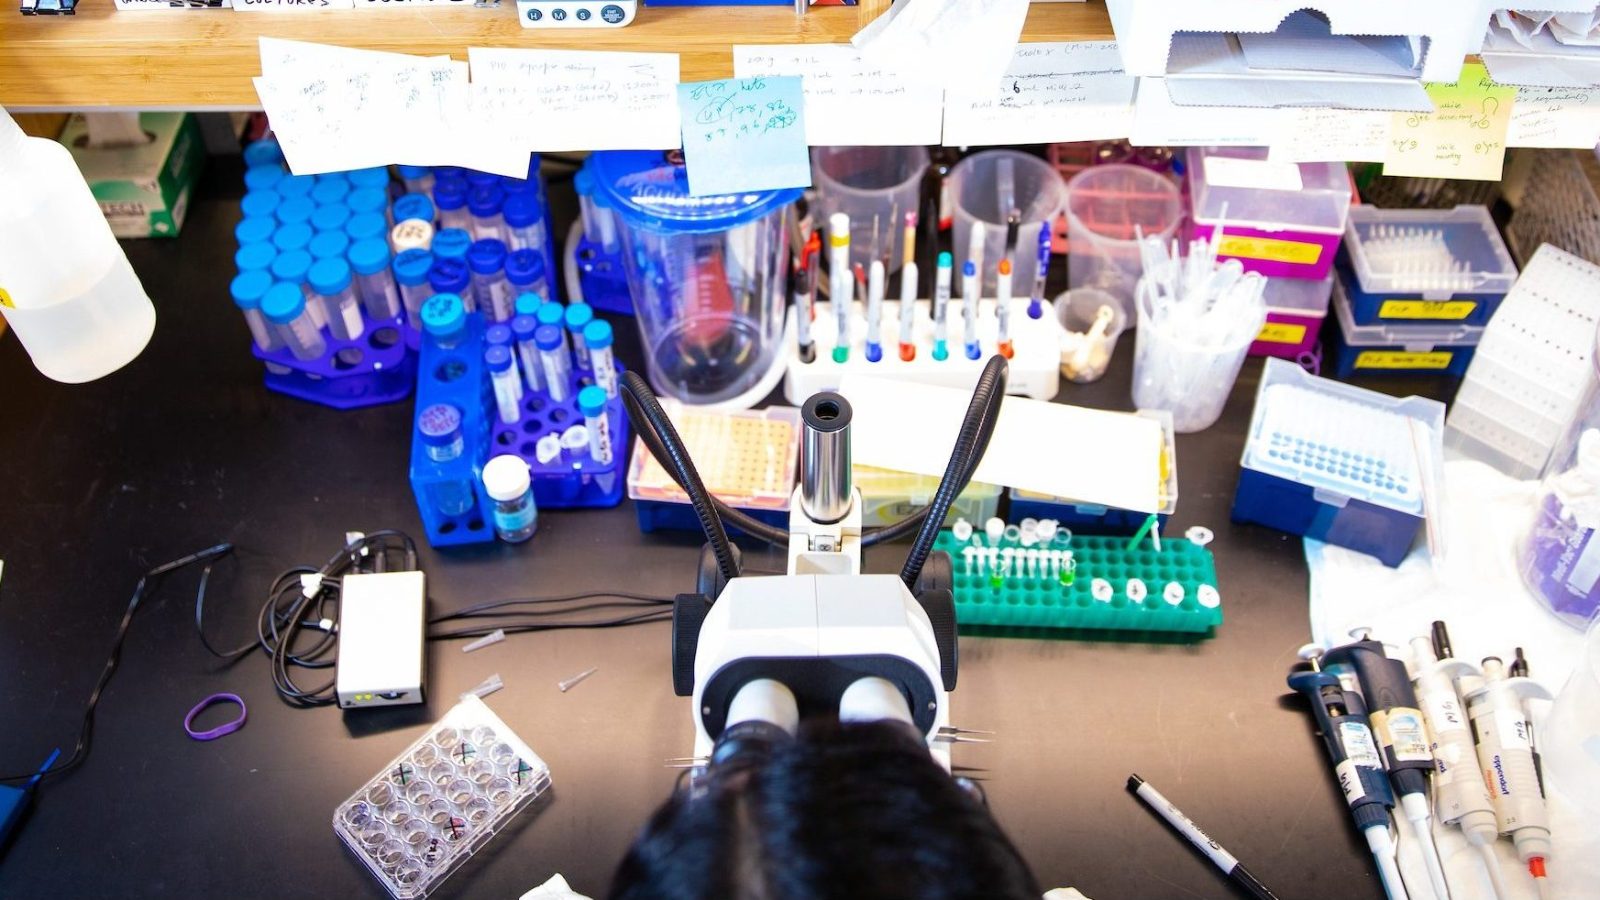 A lab table crowded with equipment including a microscope